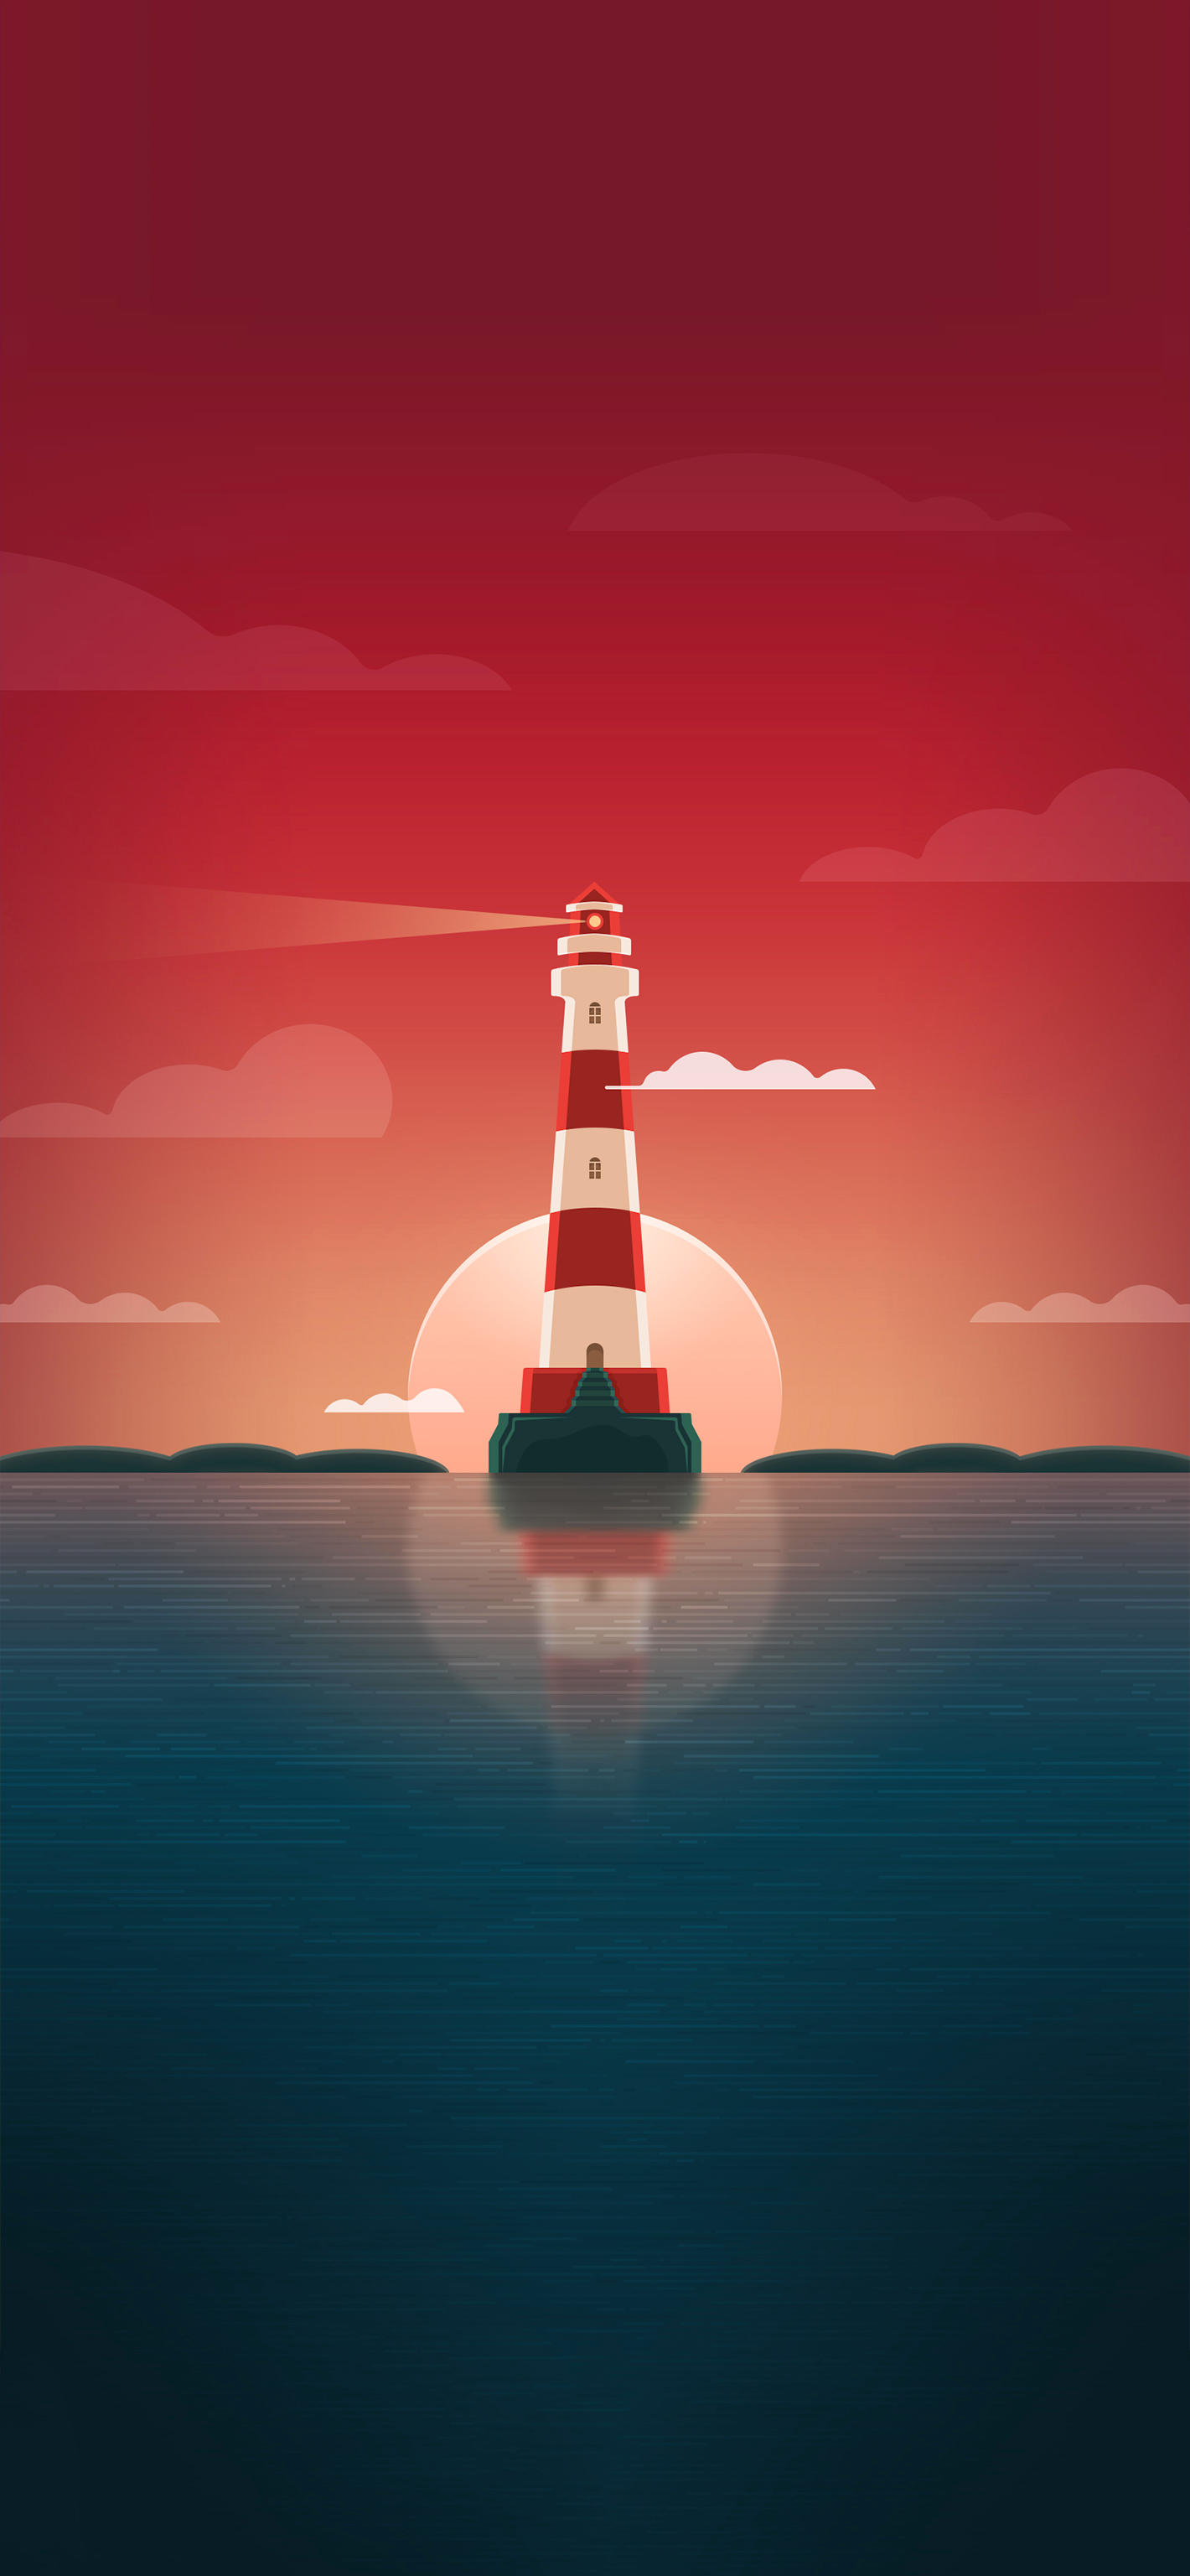 The Lighthouse Wallpapers